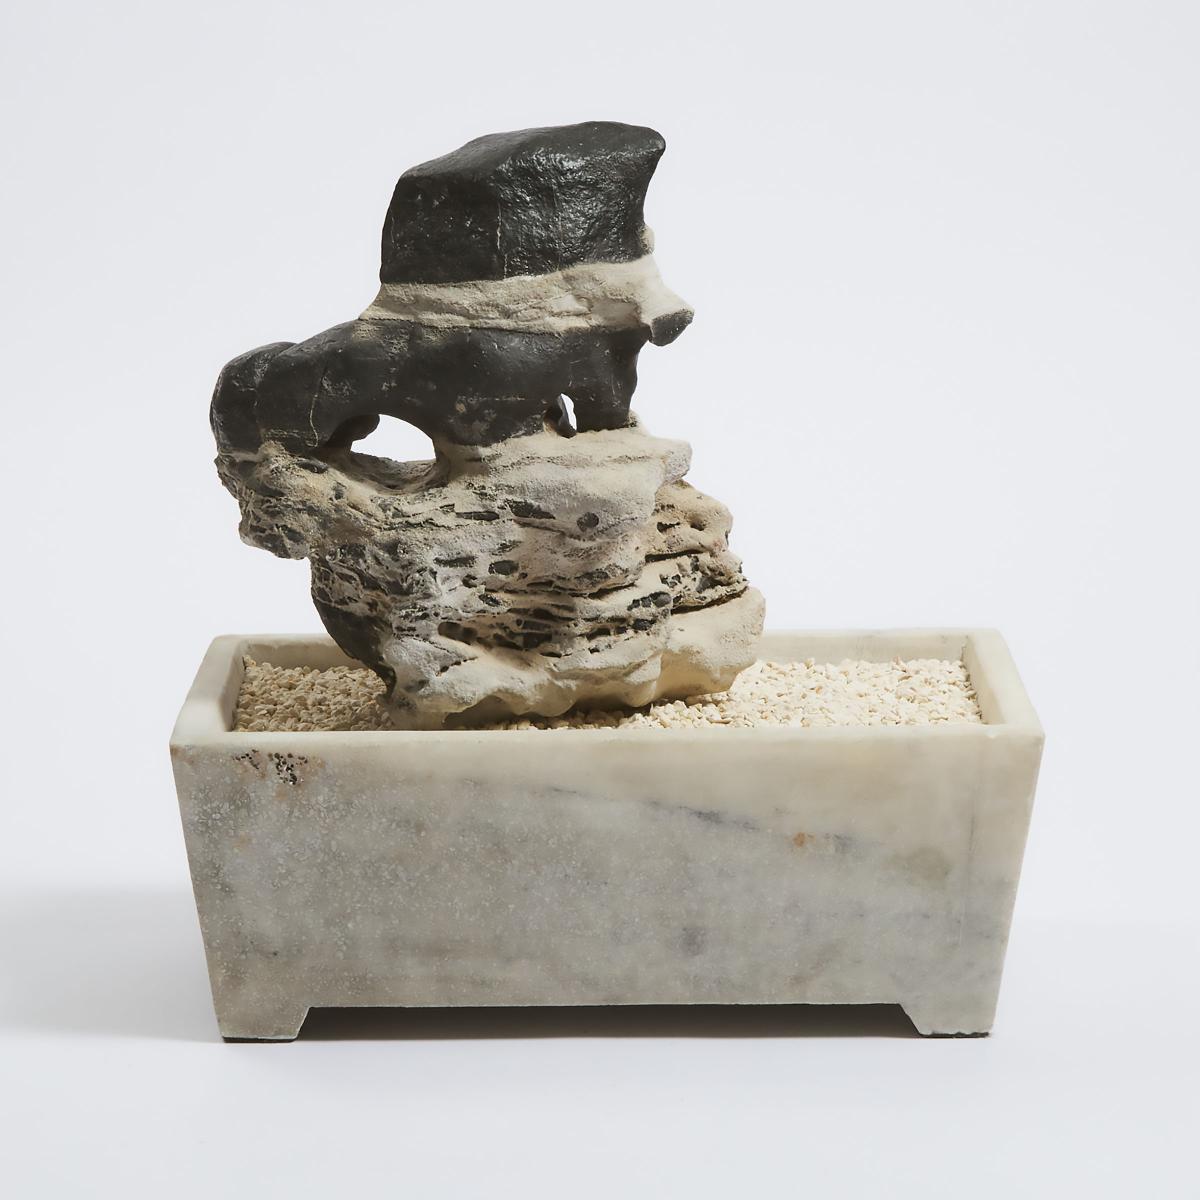 A Chinese Lingbi Scholar's Rock in a Marble Jardinière, 灵璧赏石, overall with jardinière 13.8 x 13 x 8. - Image 2 of 2